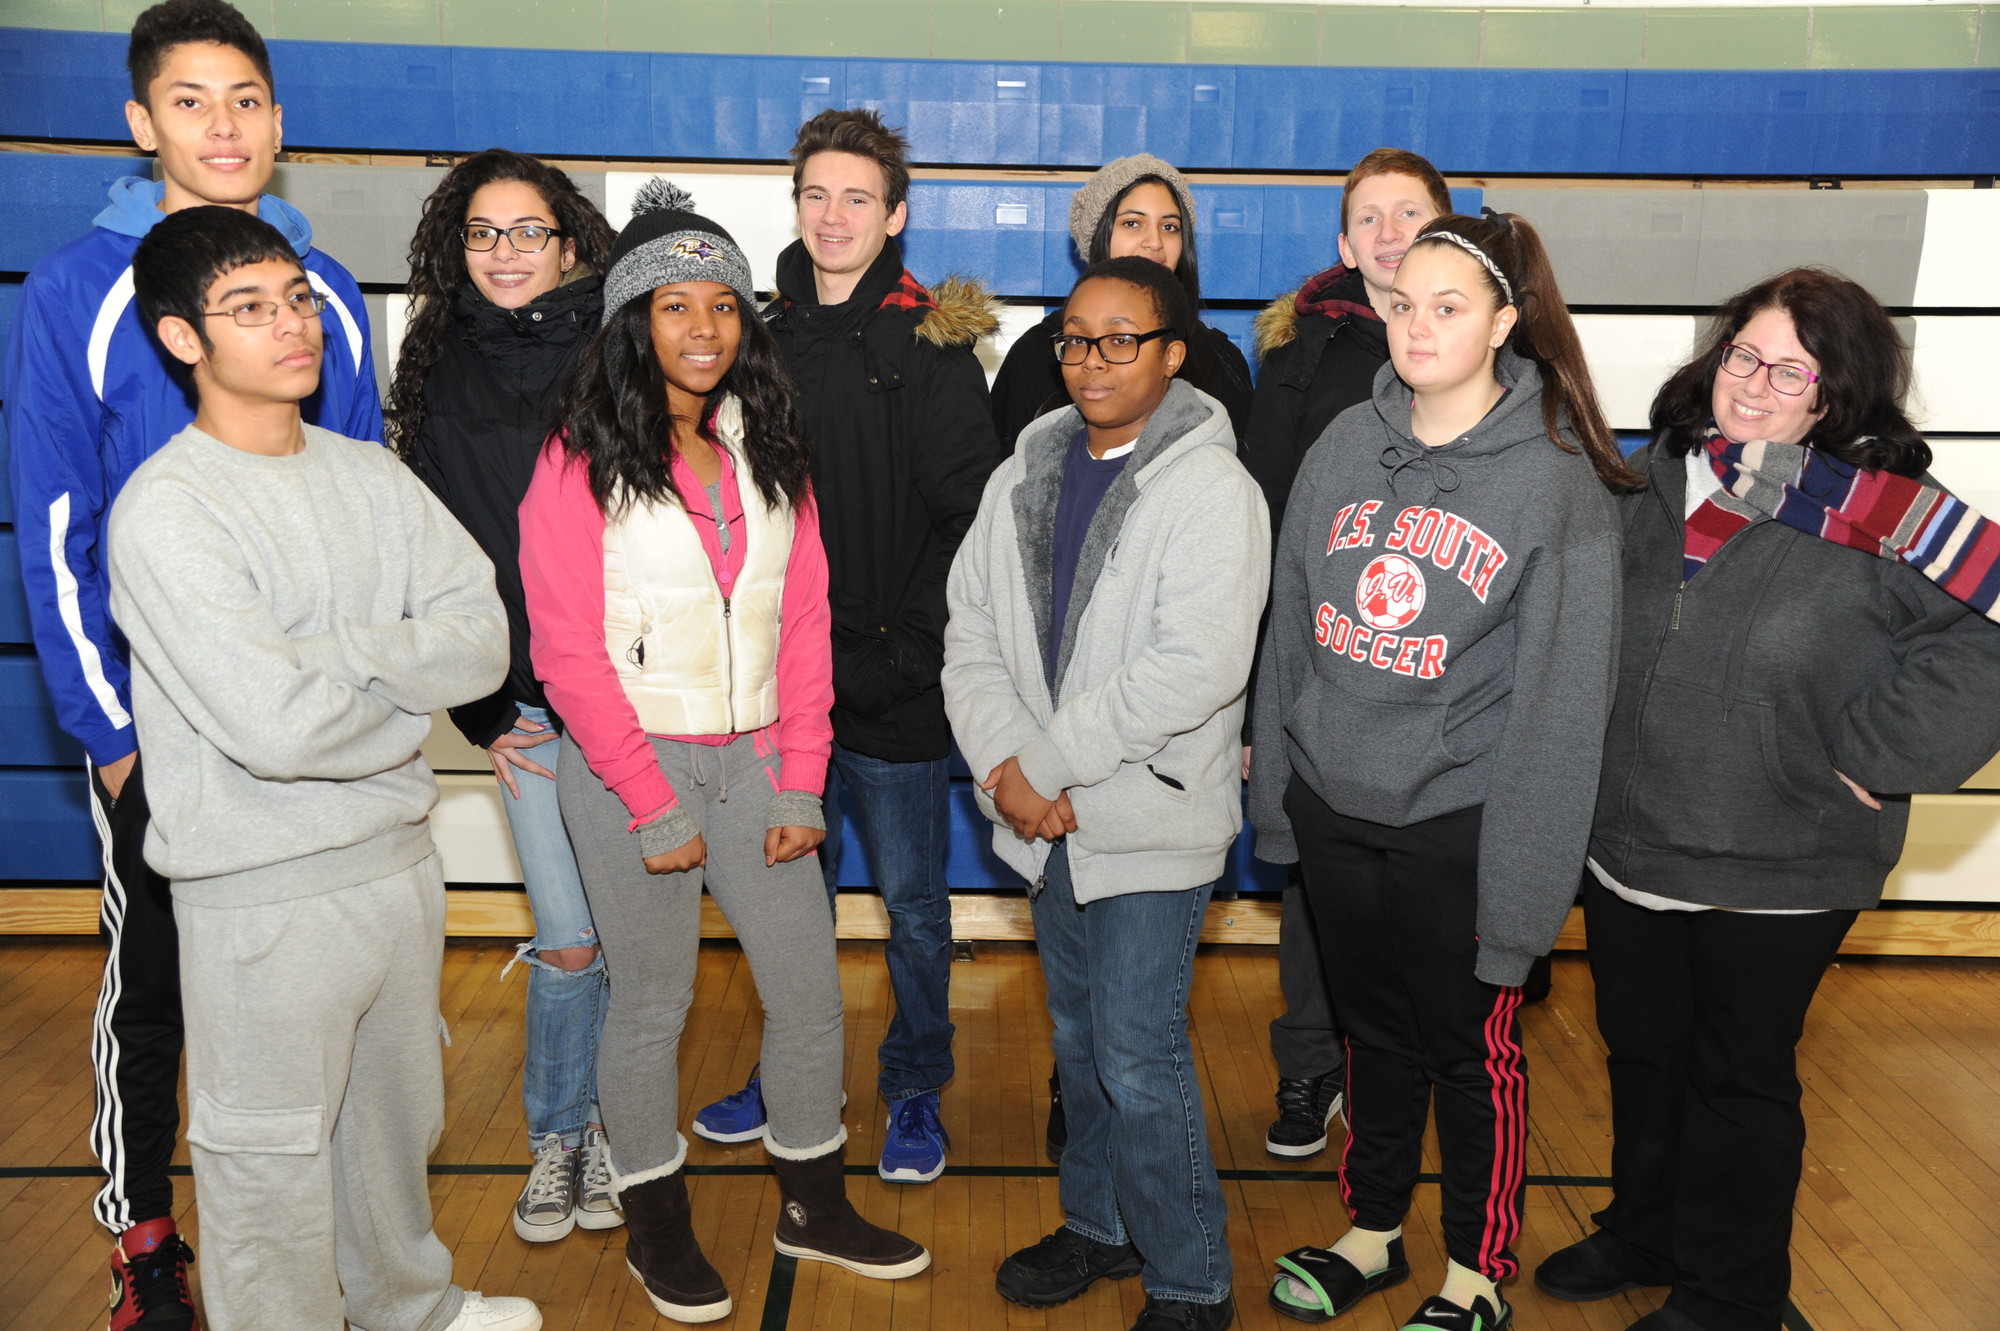 Youth council members volunteered to assist at the event. In the back row are, from left, Felipe Custodio, 17, Briana Custodio, 15, Matthew Bitetto, 16, Jane Khan, 15, and Jason Bitetto, 15. In the front row are Giovanni Rodriguez, 15, Tasnova Osmani, 14, Jonathan Val, 14, Megan Ross, 15, and adult supervisor Rise Bitetto.